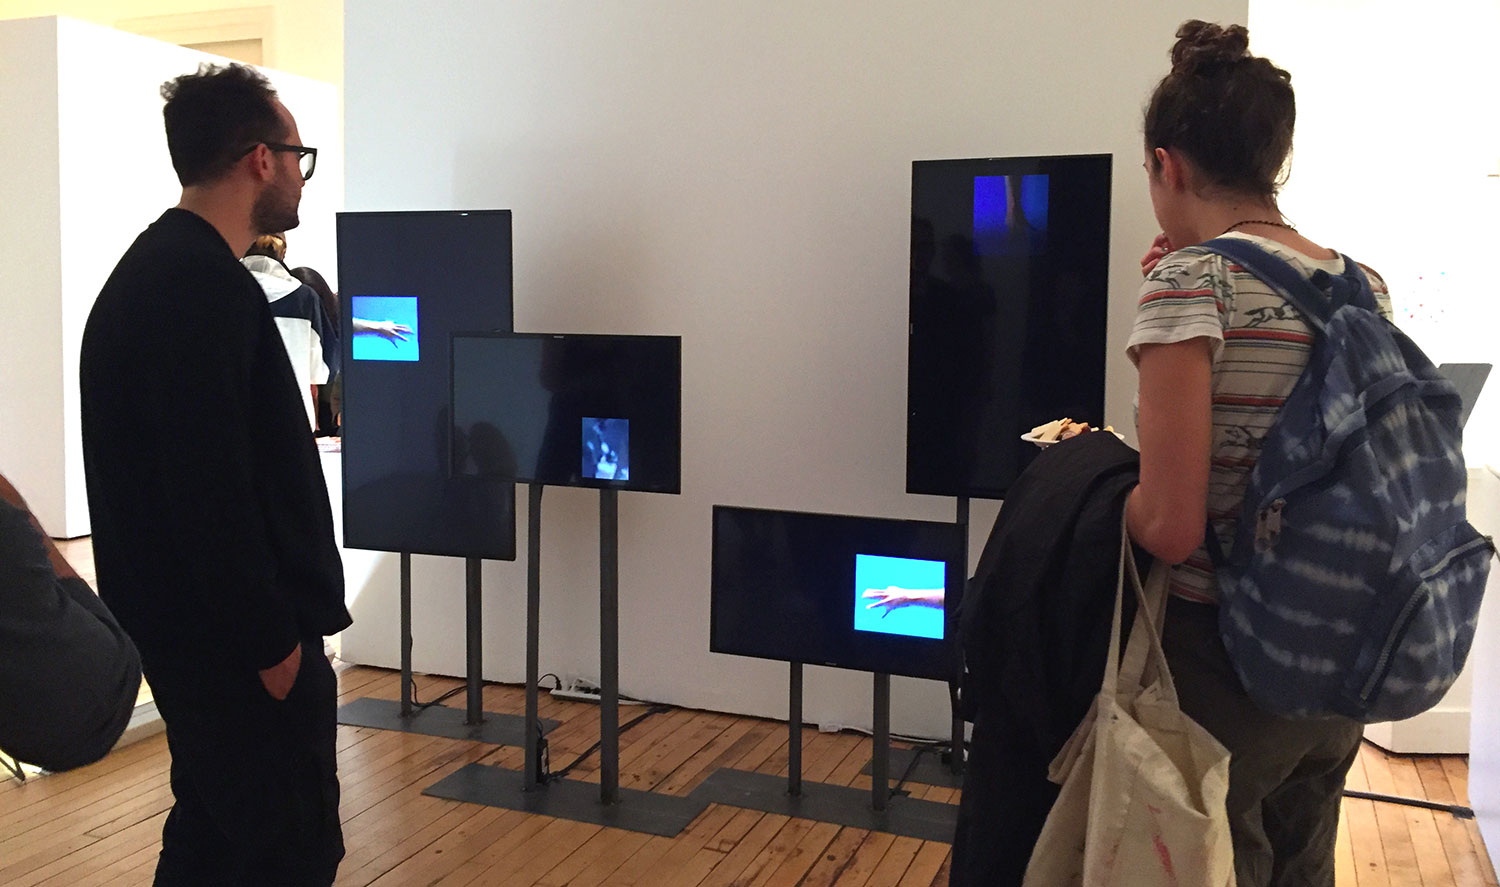 Installation view of TV monitors and two people looking at them